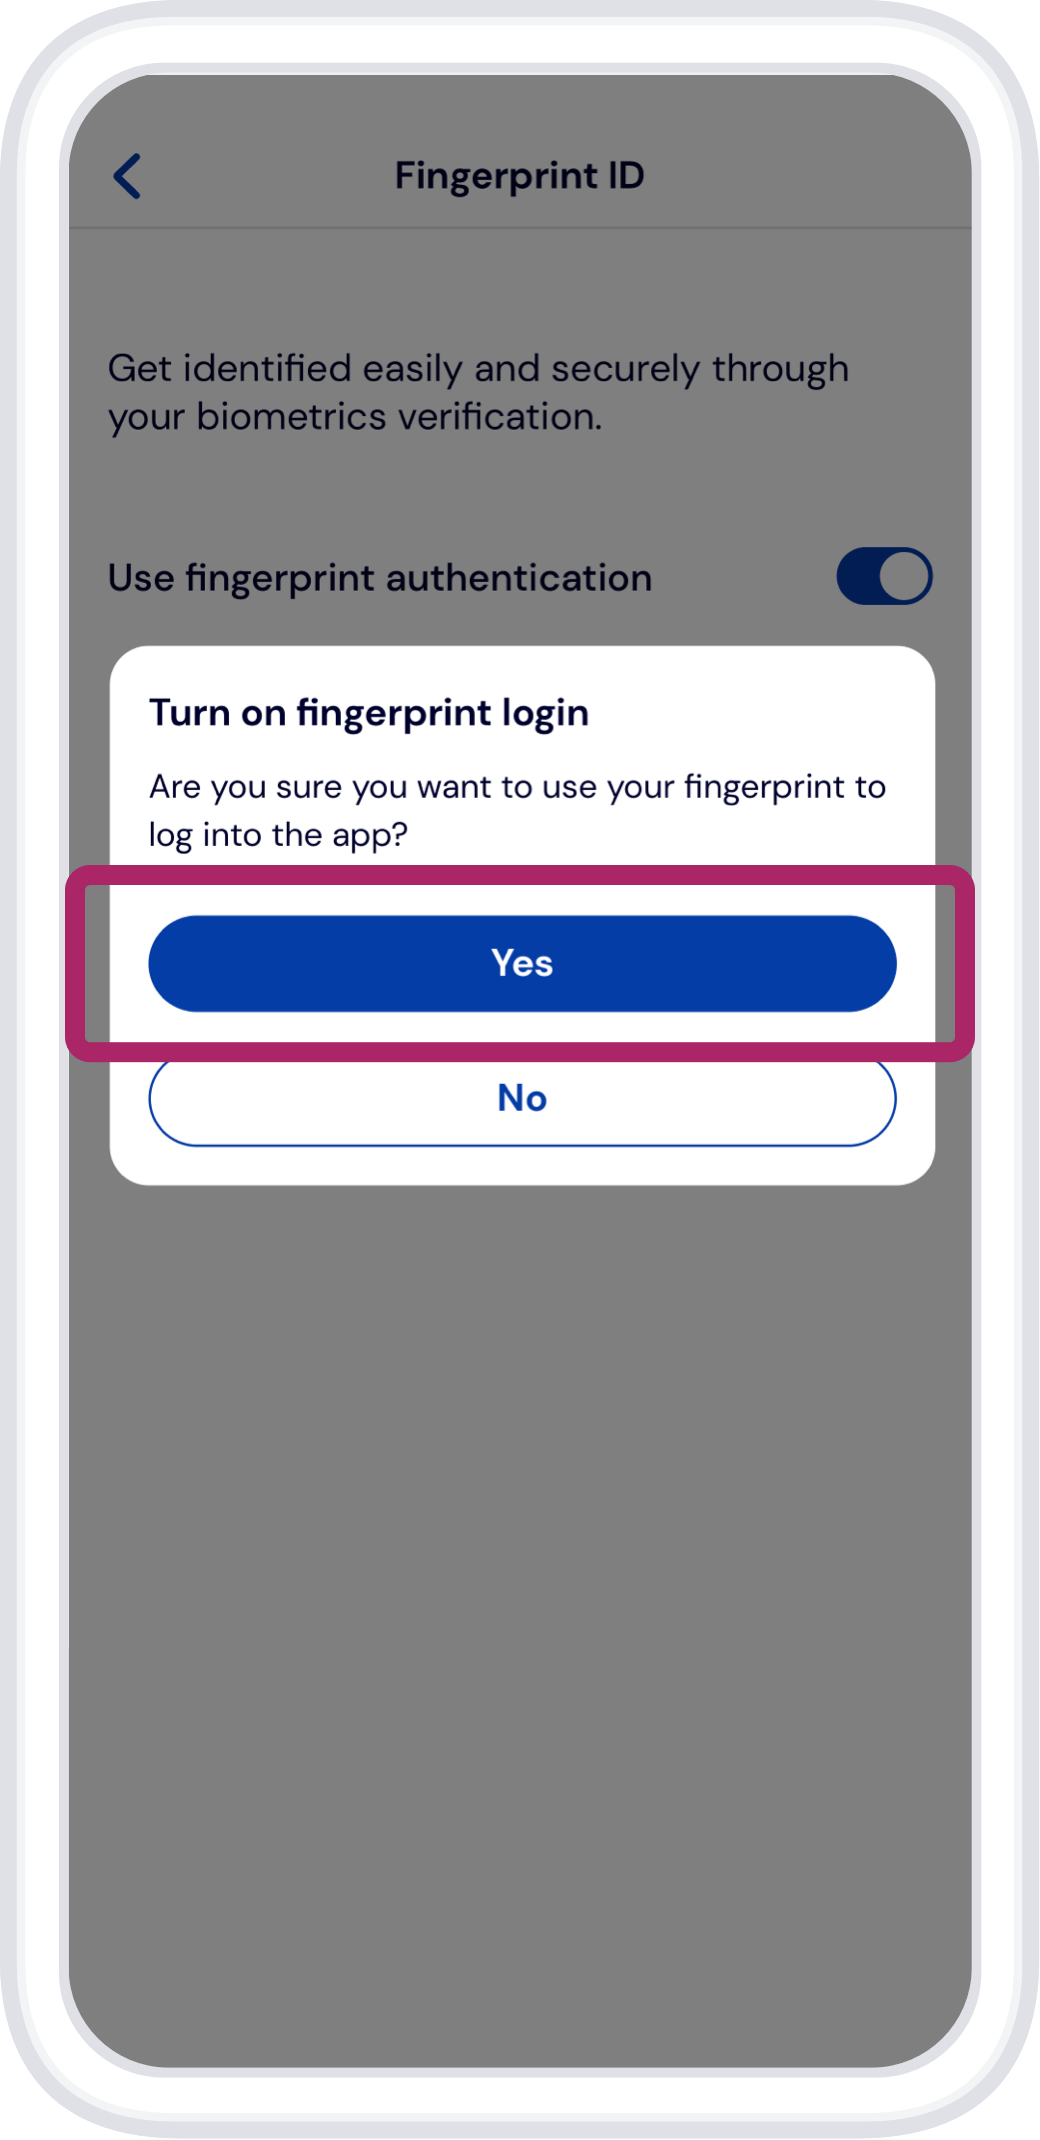 To activate it, tap ‘Yes’